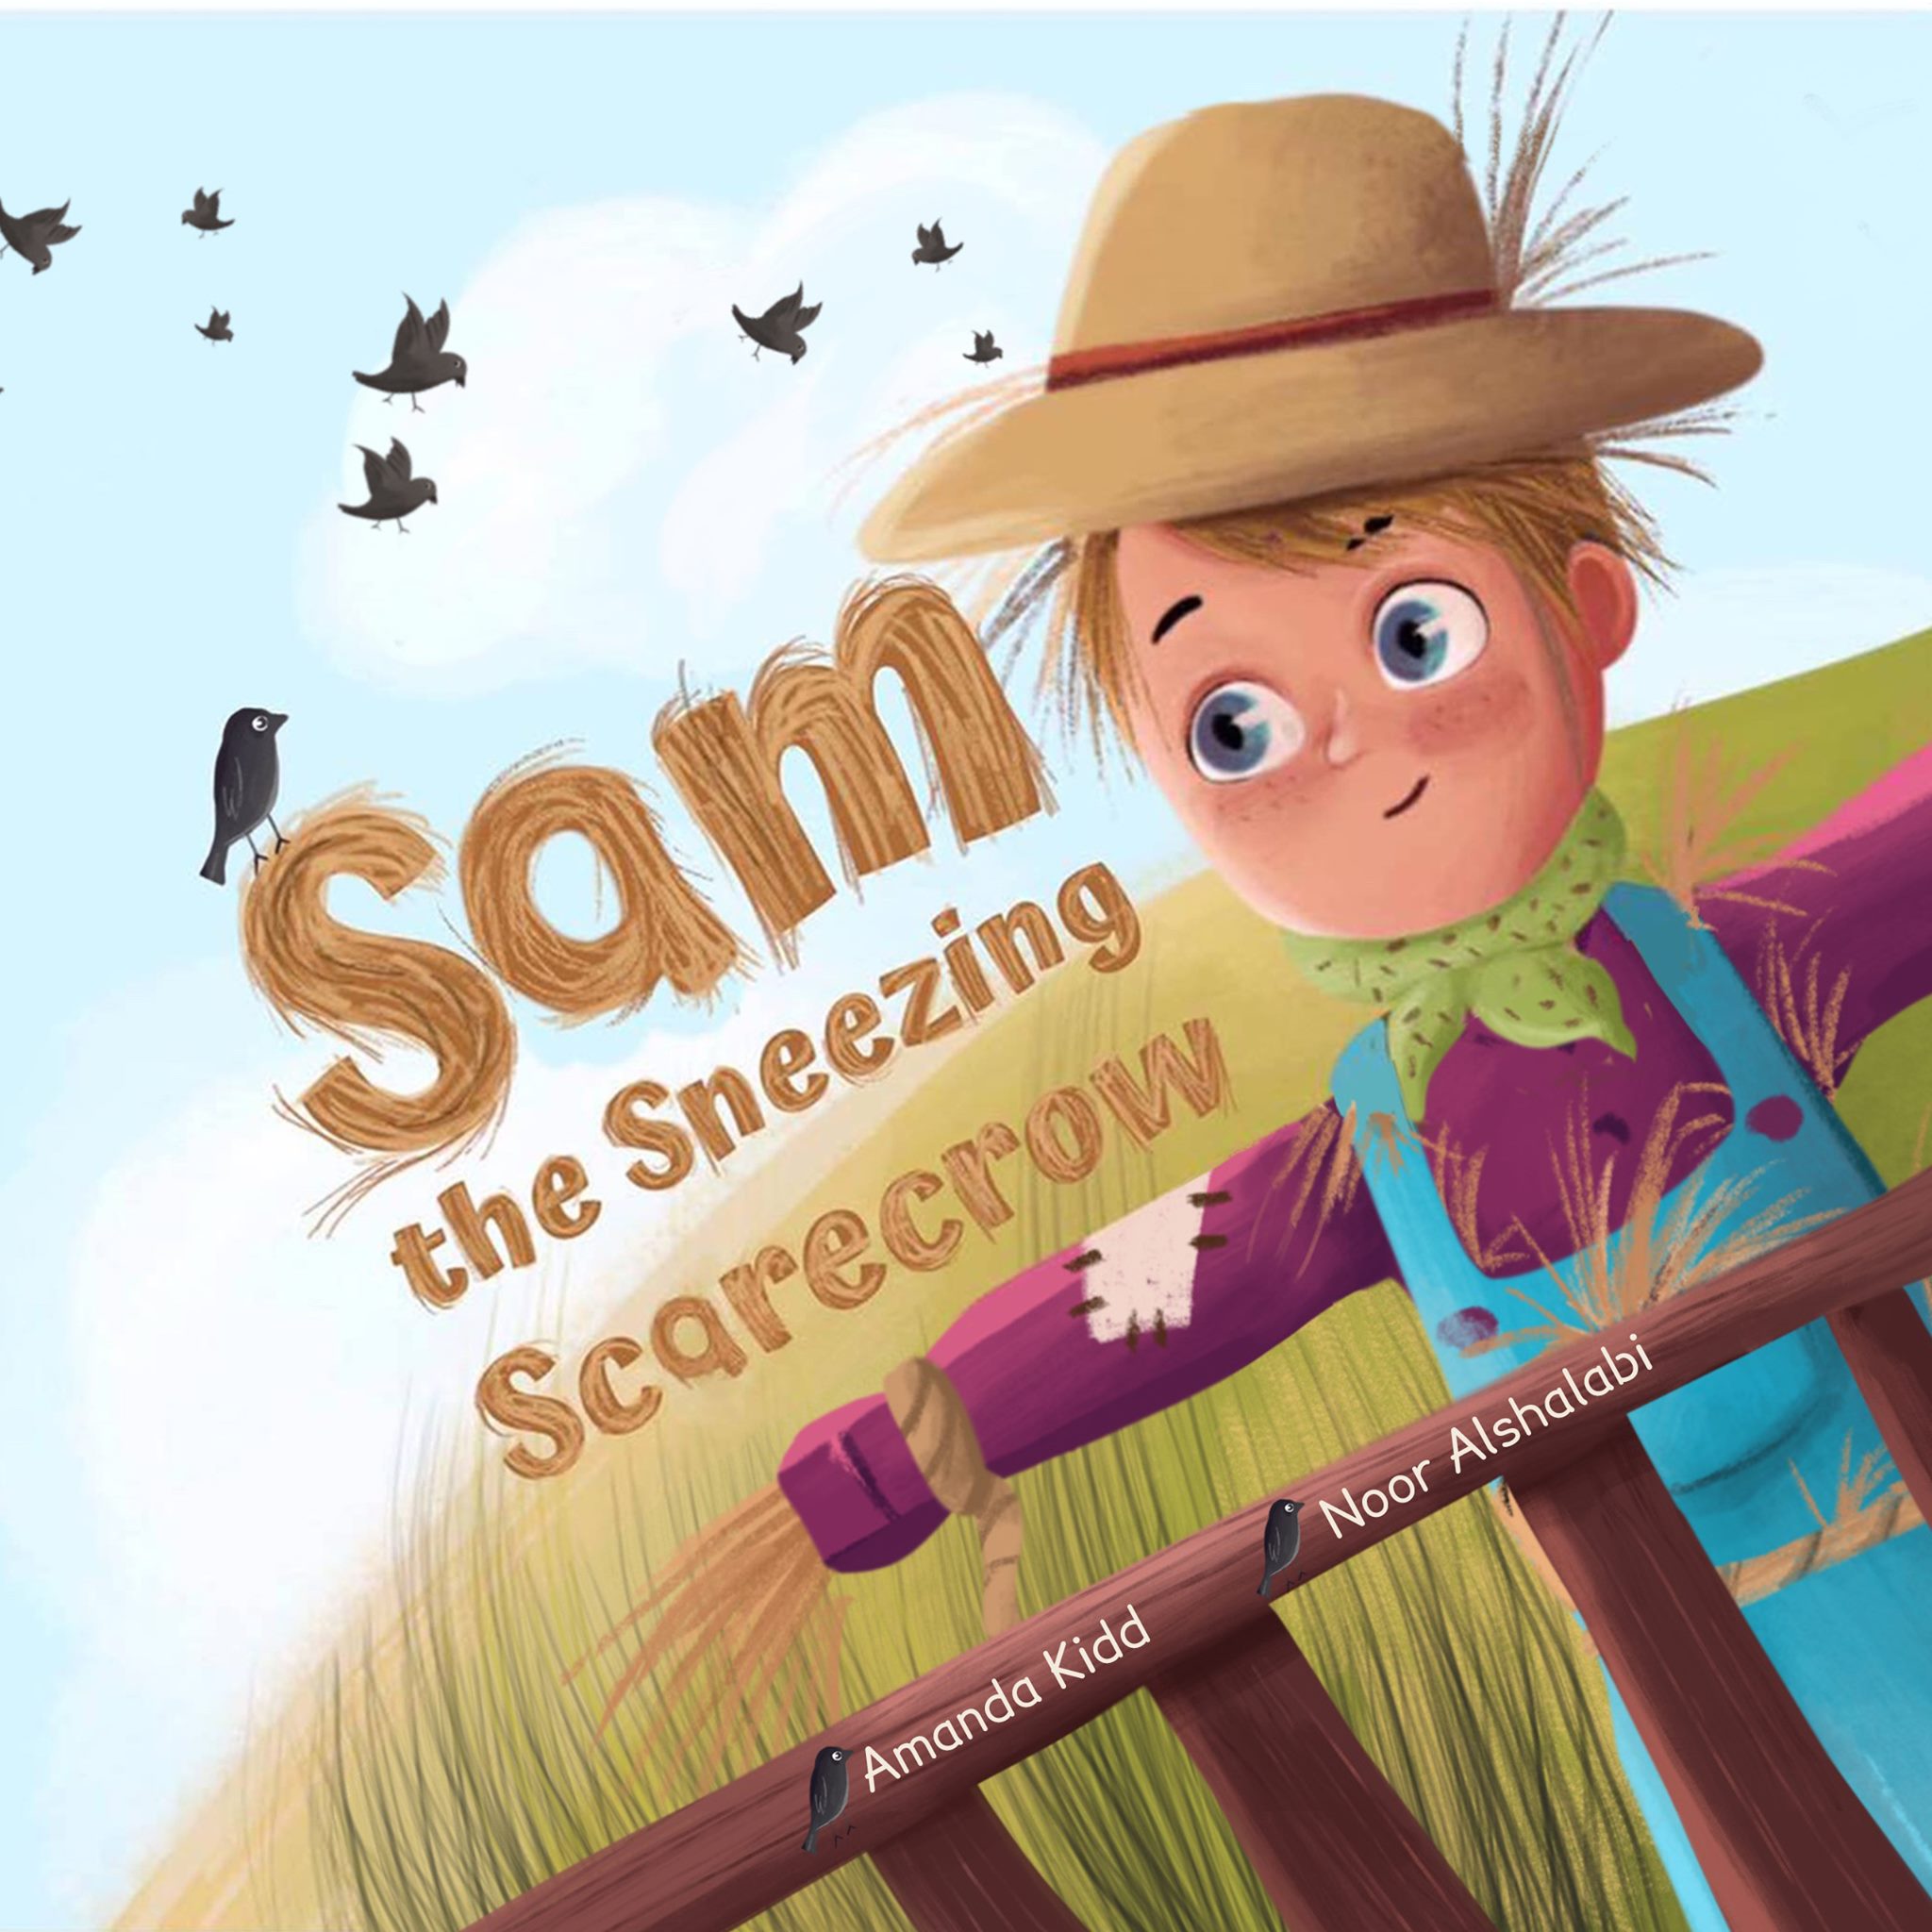 Sam and the Sneezing Scarecrow